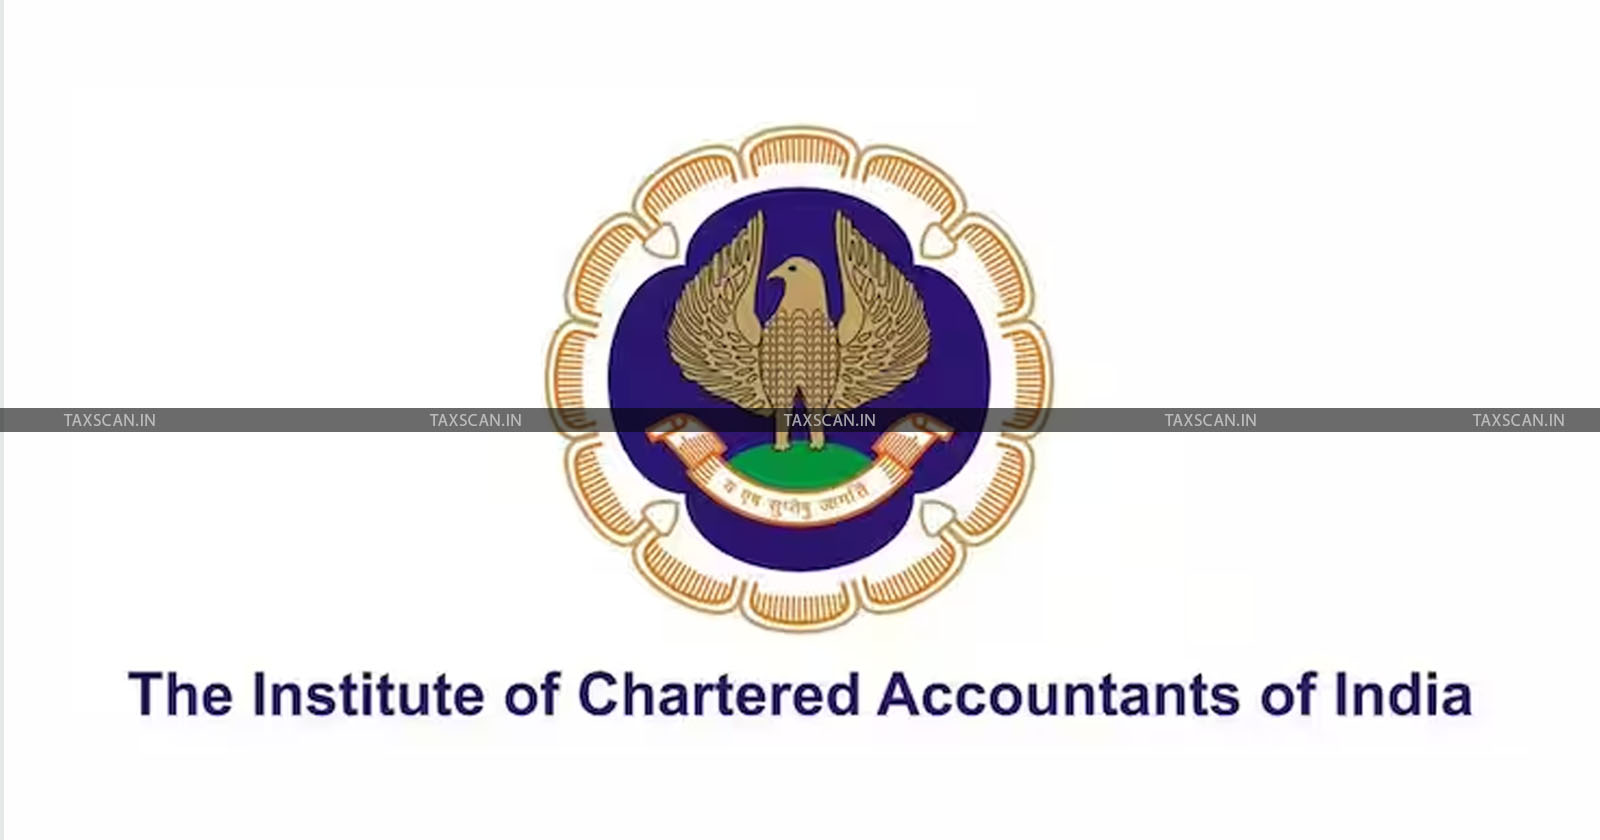 ICAI - Exposure Draft - Guidance Note - Reports on Audit - Income Tax Act - Public Comments - taxscan